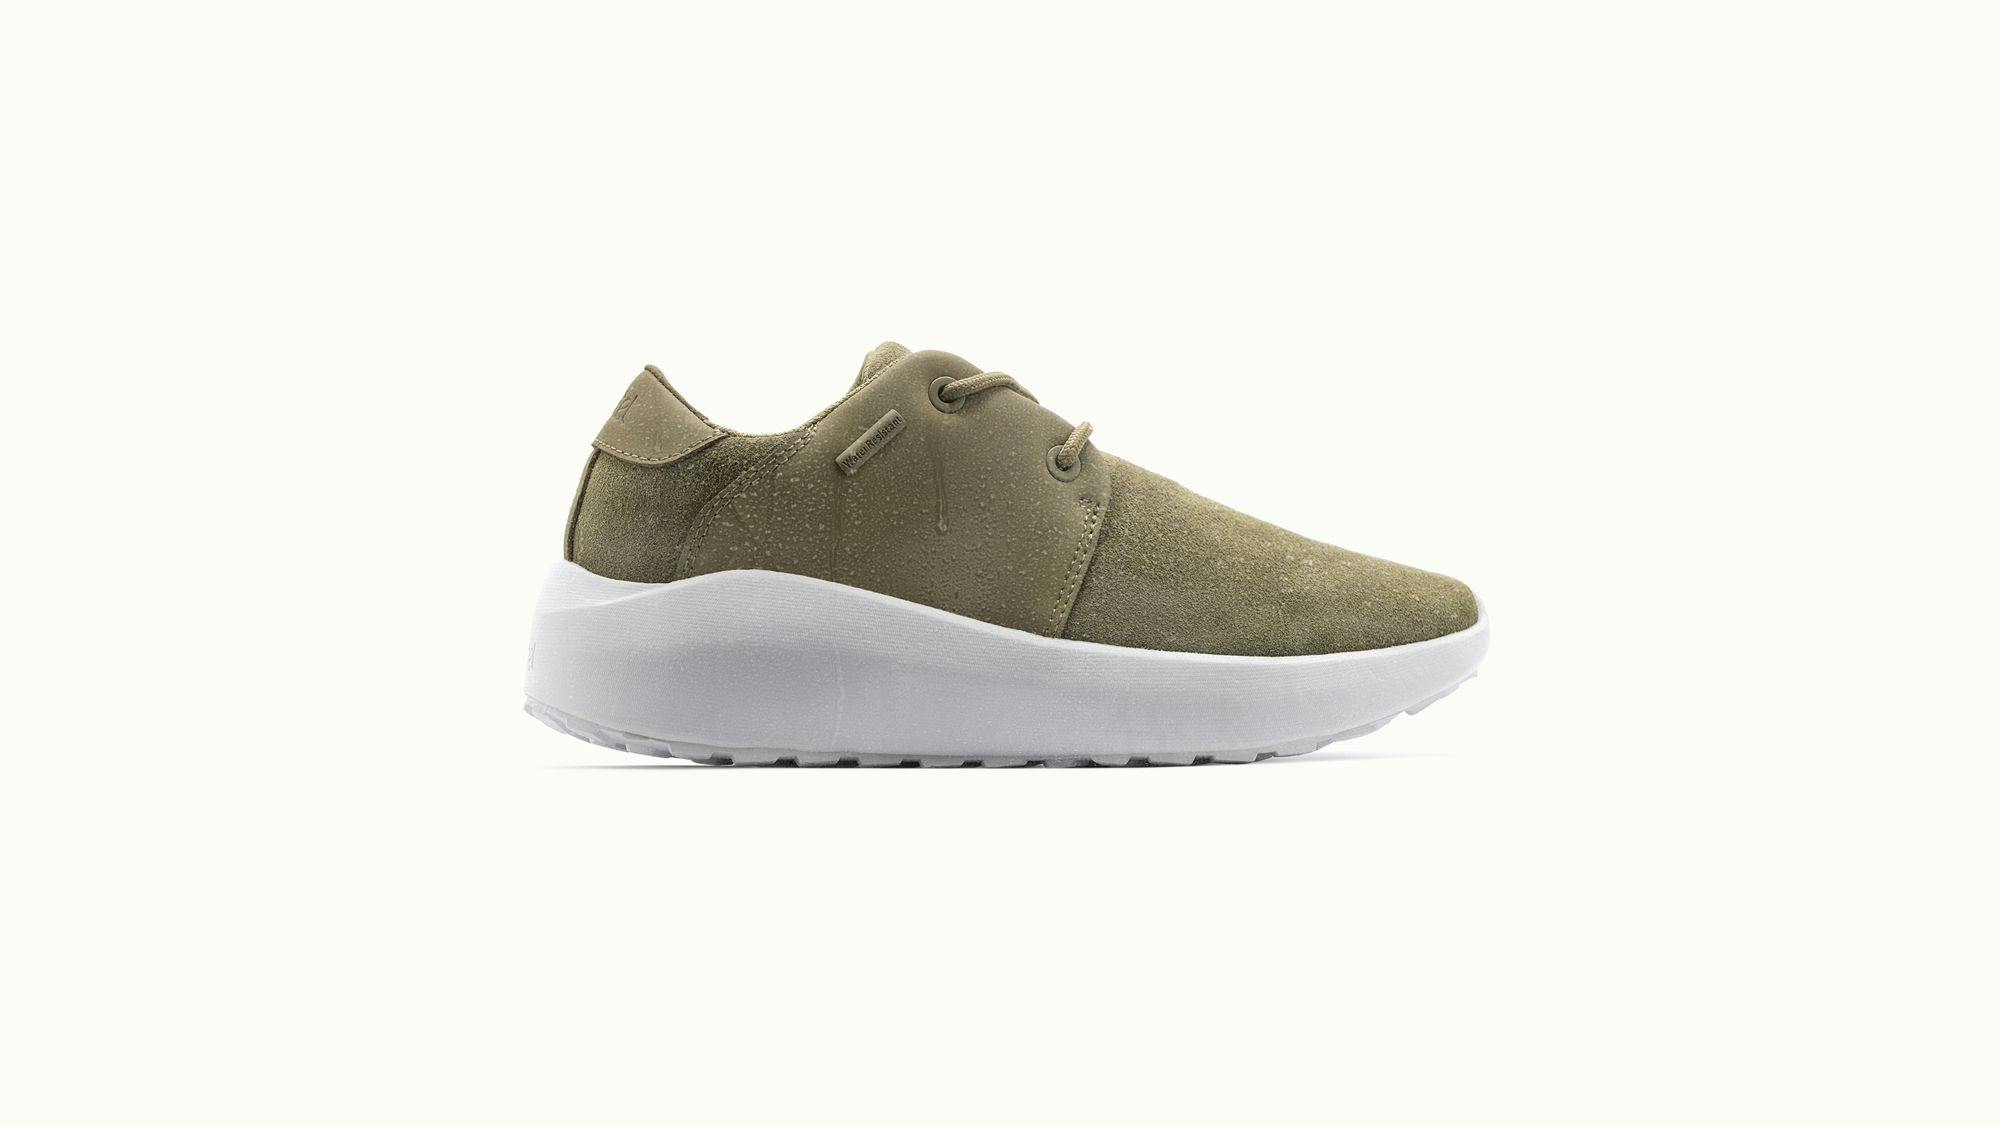 Lofoten Terrain Suede sneakers adapt to any climate with waterproof leather and a sturdy sole for protection and style.